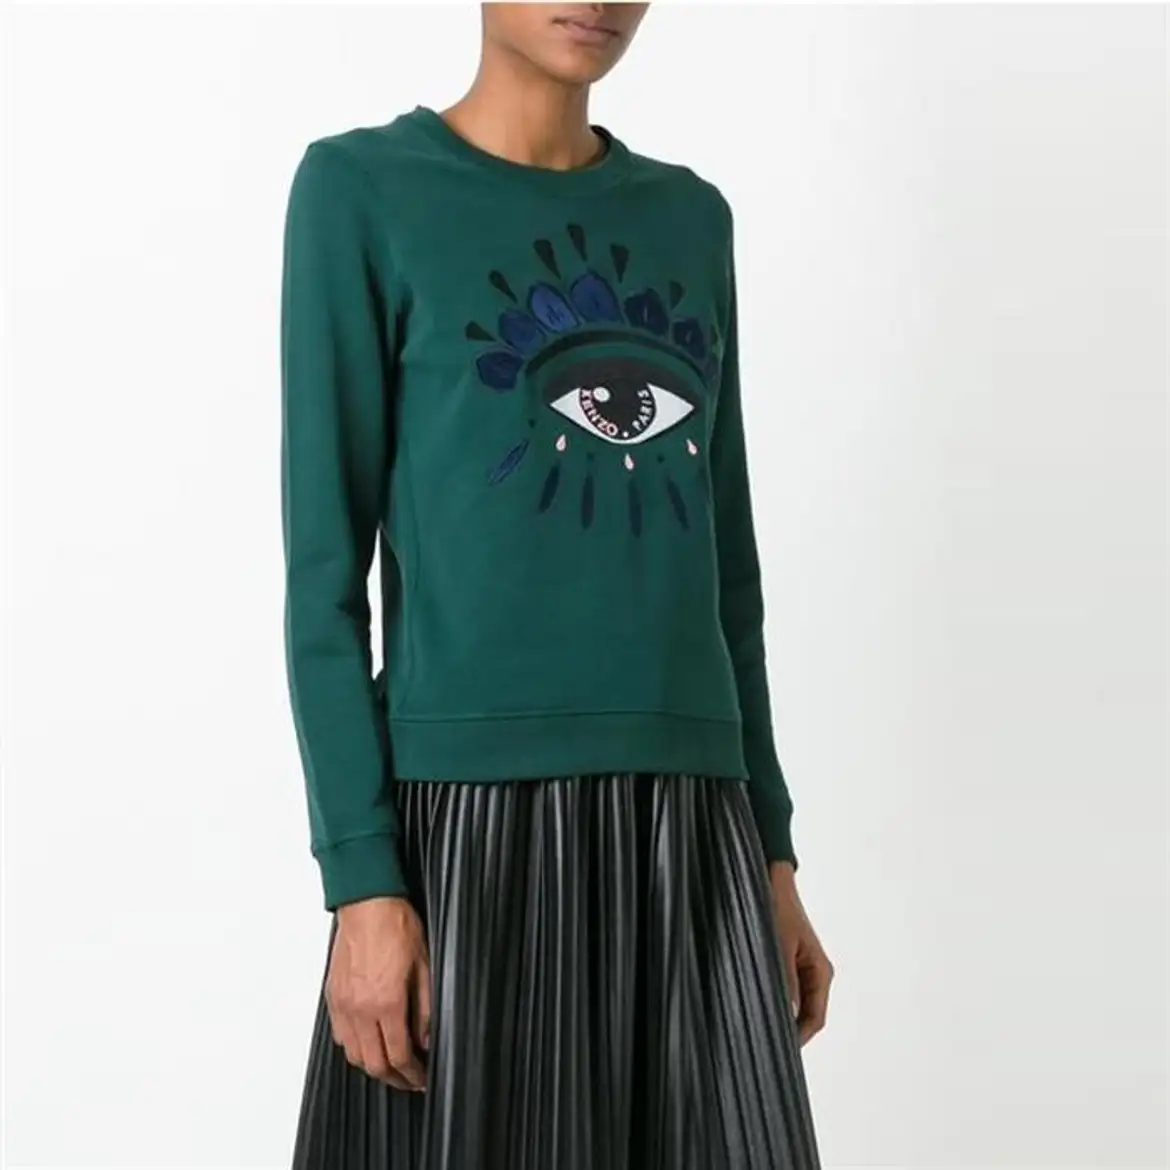 KENZO: Tiger Varsity Jungle sweatshirt in cotton with embroidery - Black